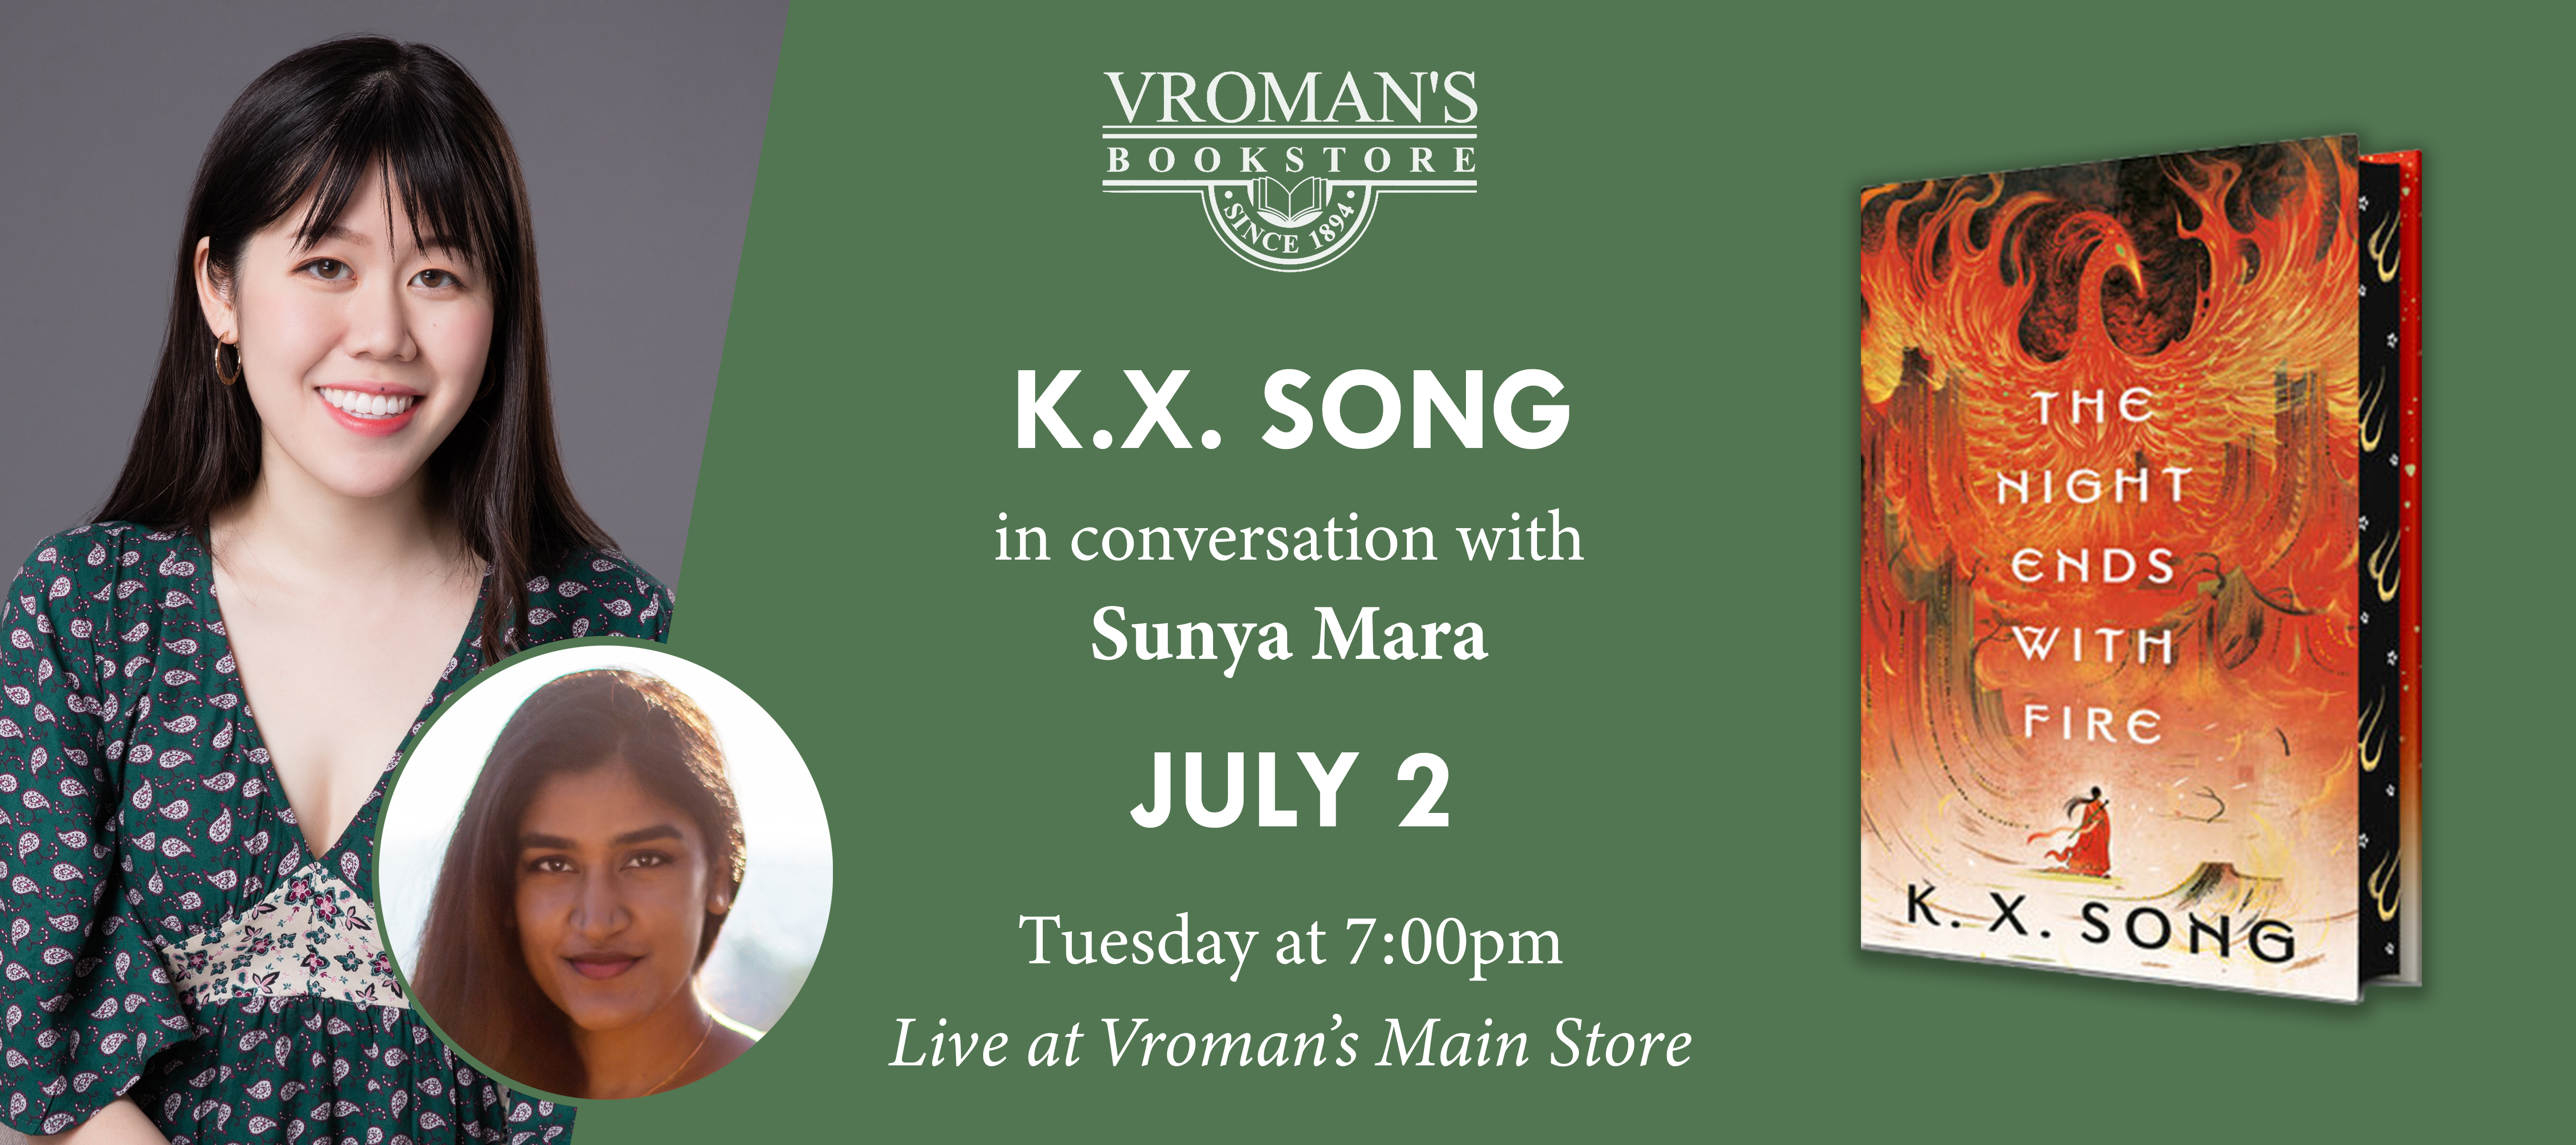 K.X. Song book event at Vroman's